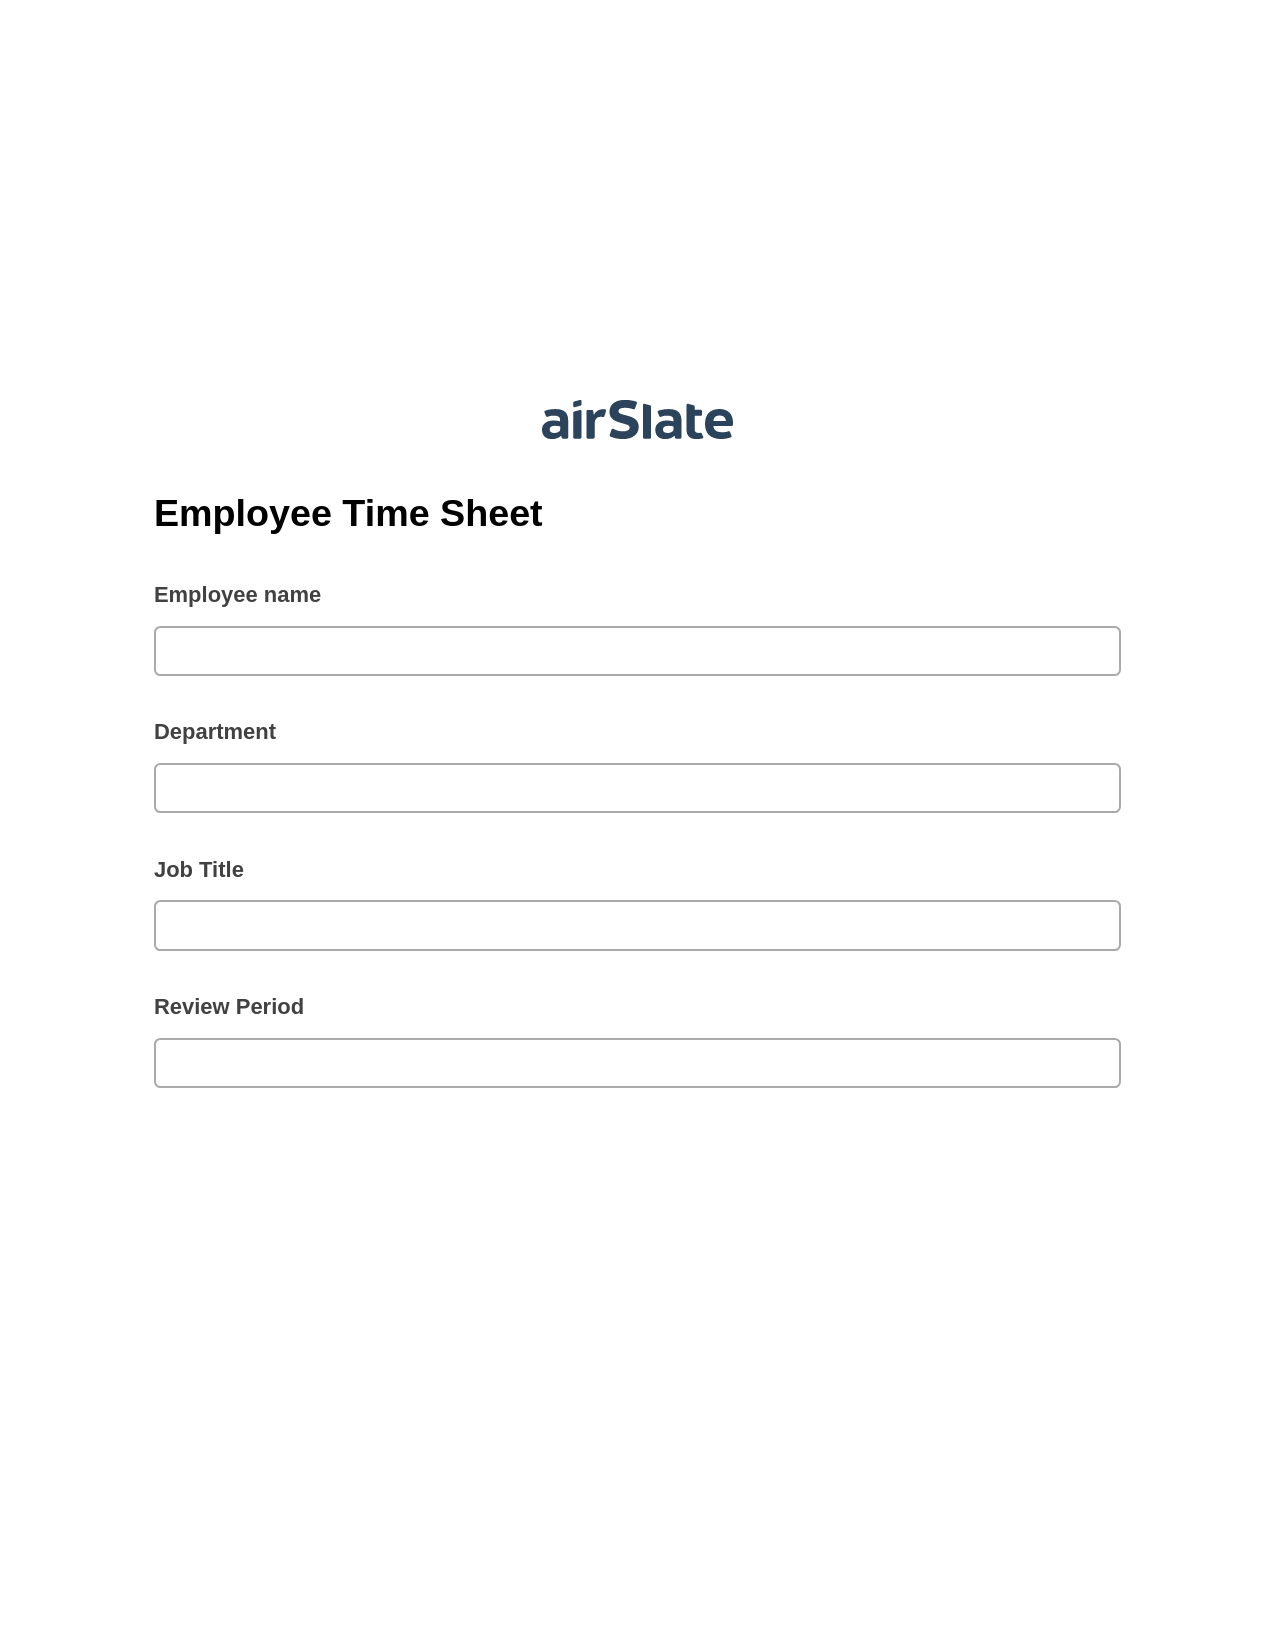 Employee Time Sheet Pre-fill Dropdowns from Airtable, Create Salesforce Records Bot, Export to Excel 365 Bot